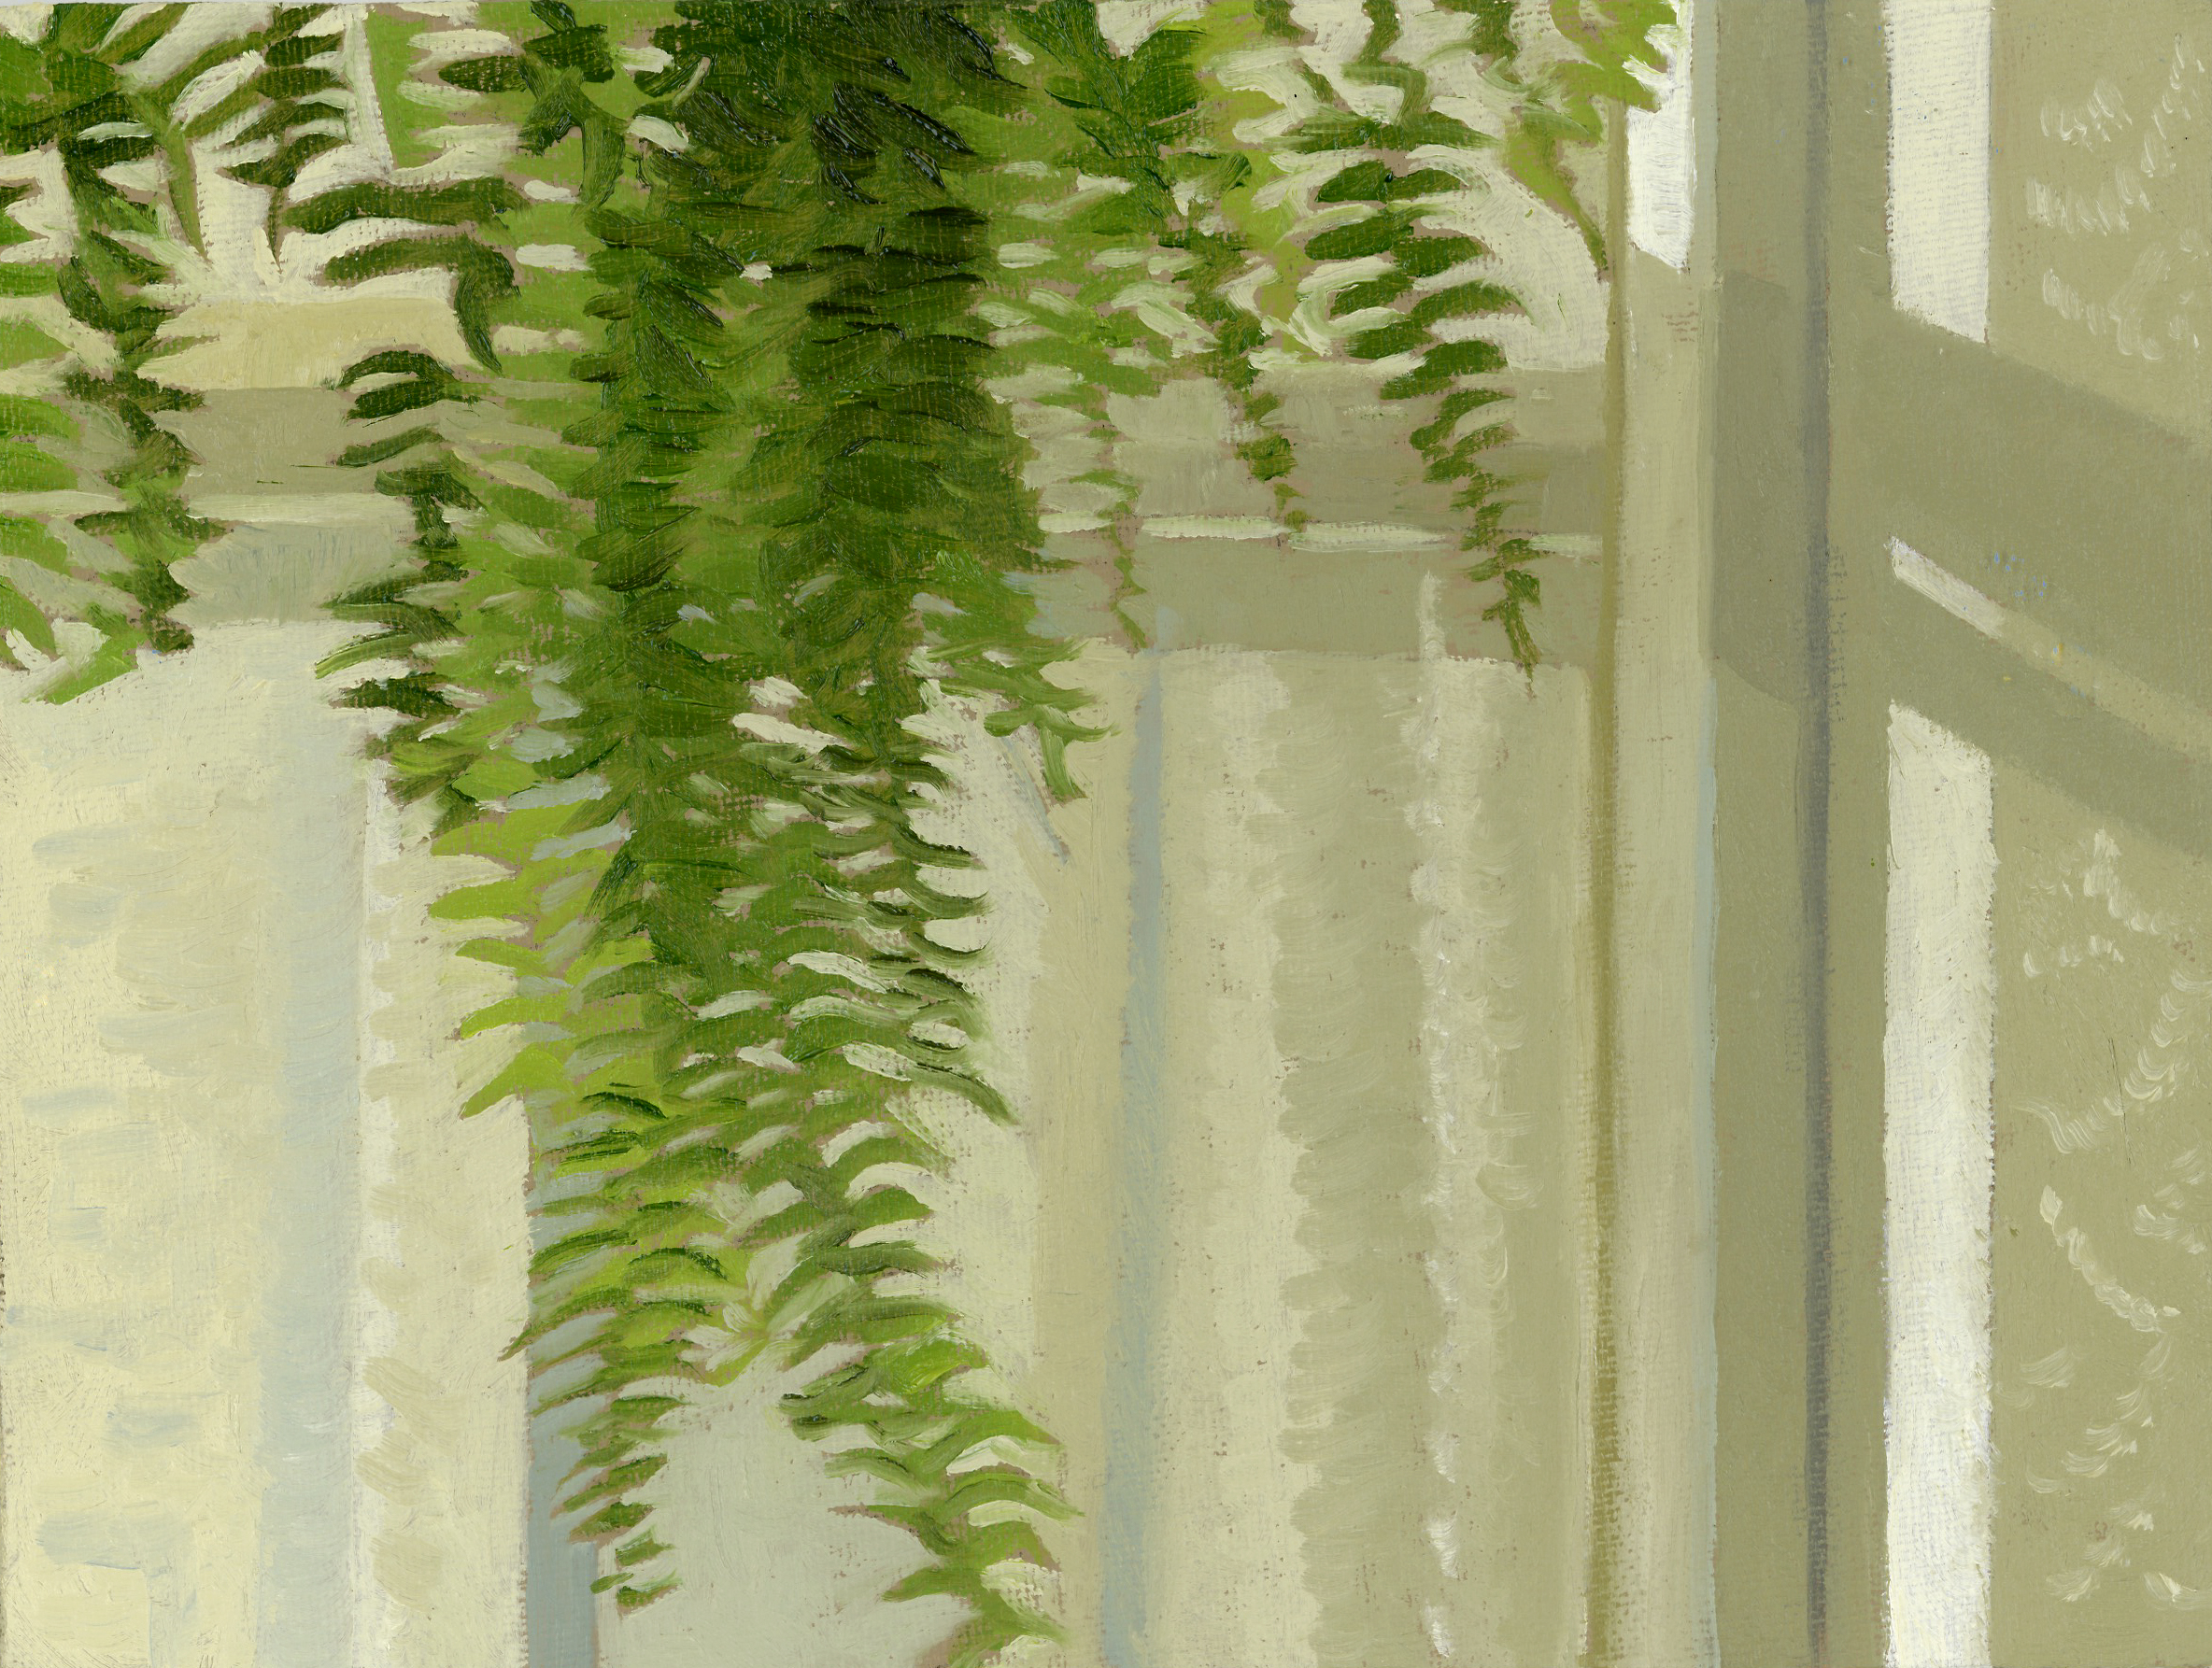 Fern and lace.jpg